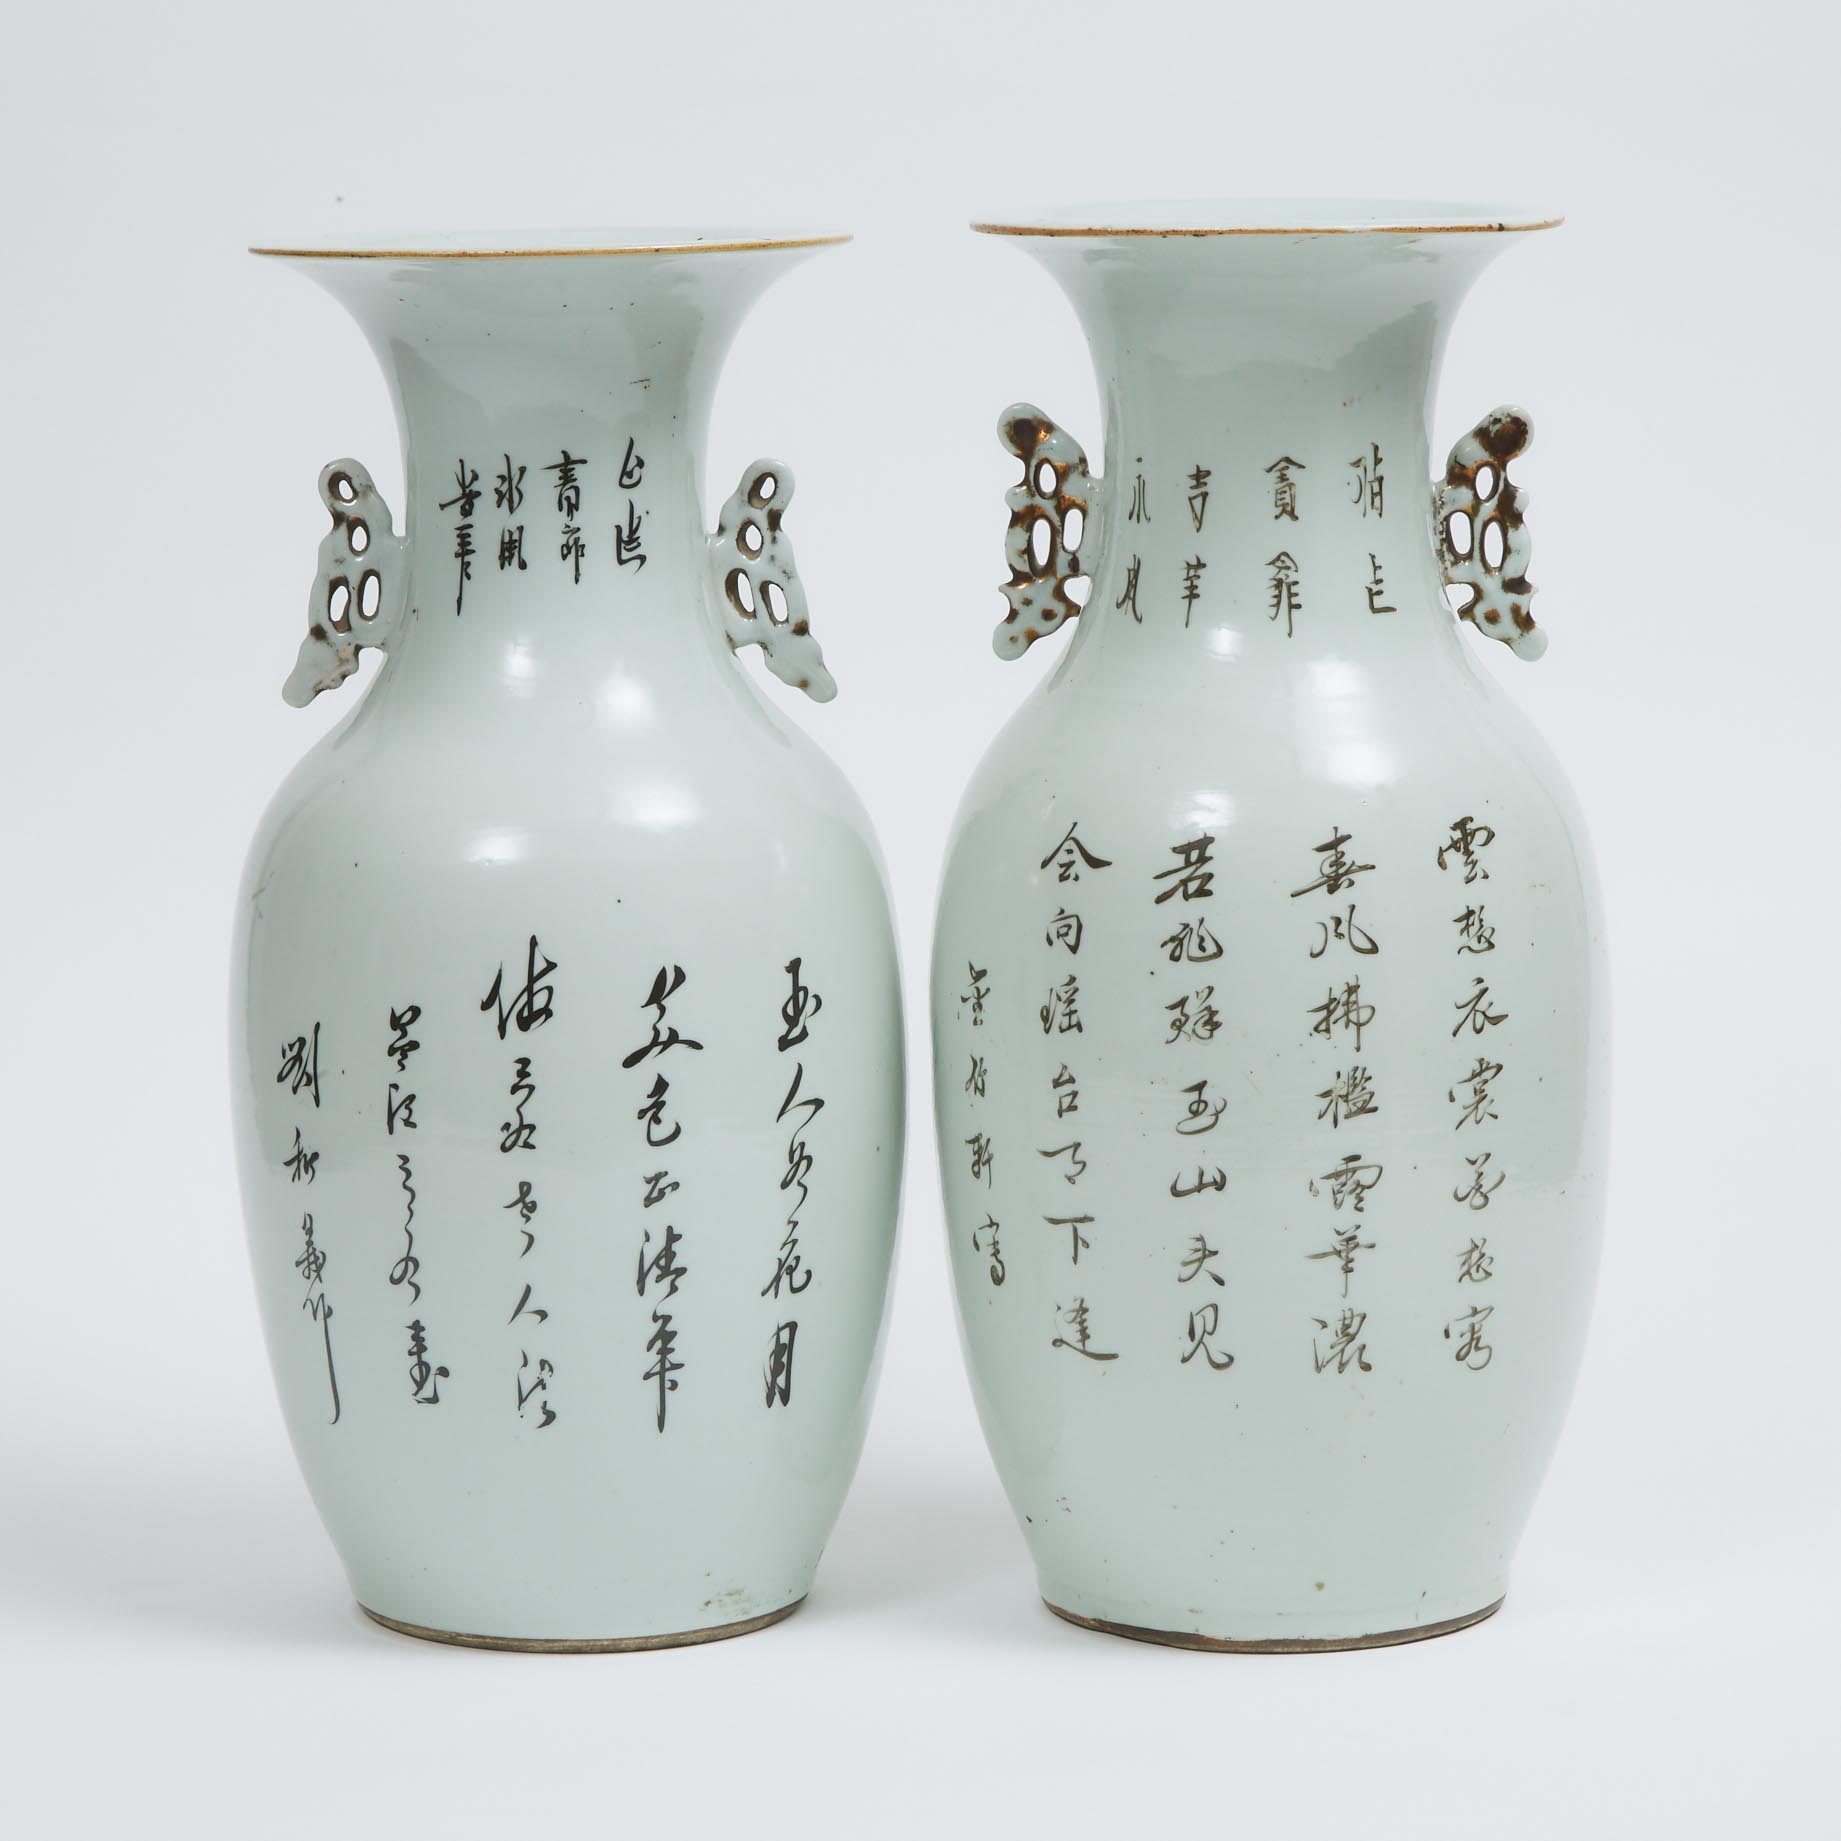 Two Polychrome Enameled Vases with Figures and Calligraphy, Republican Period